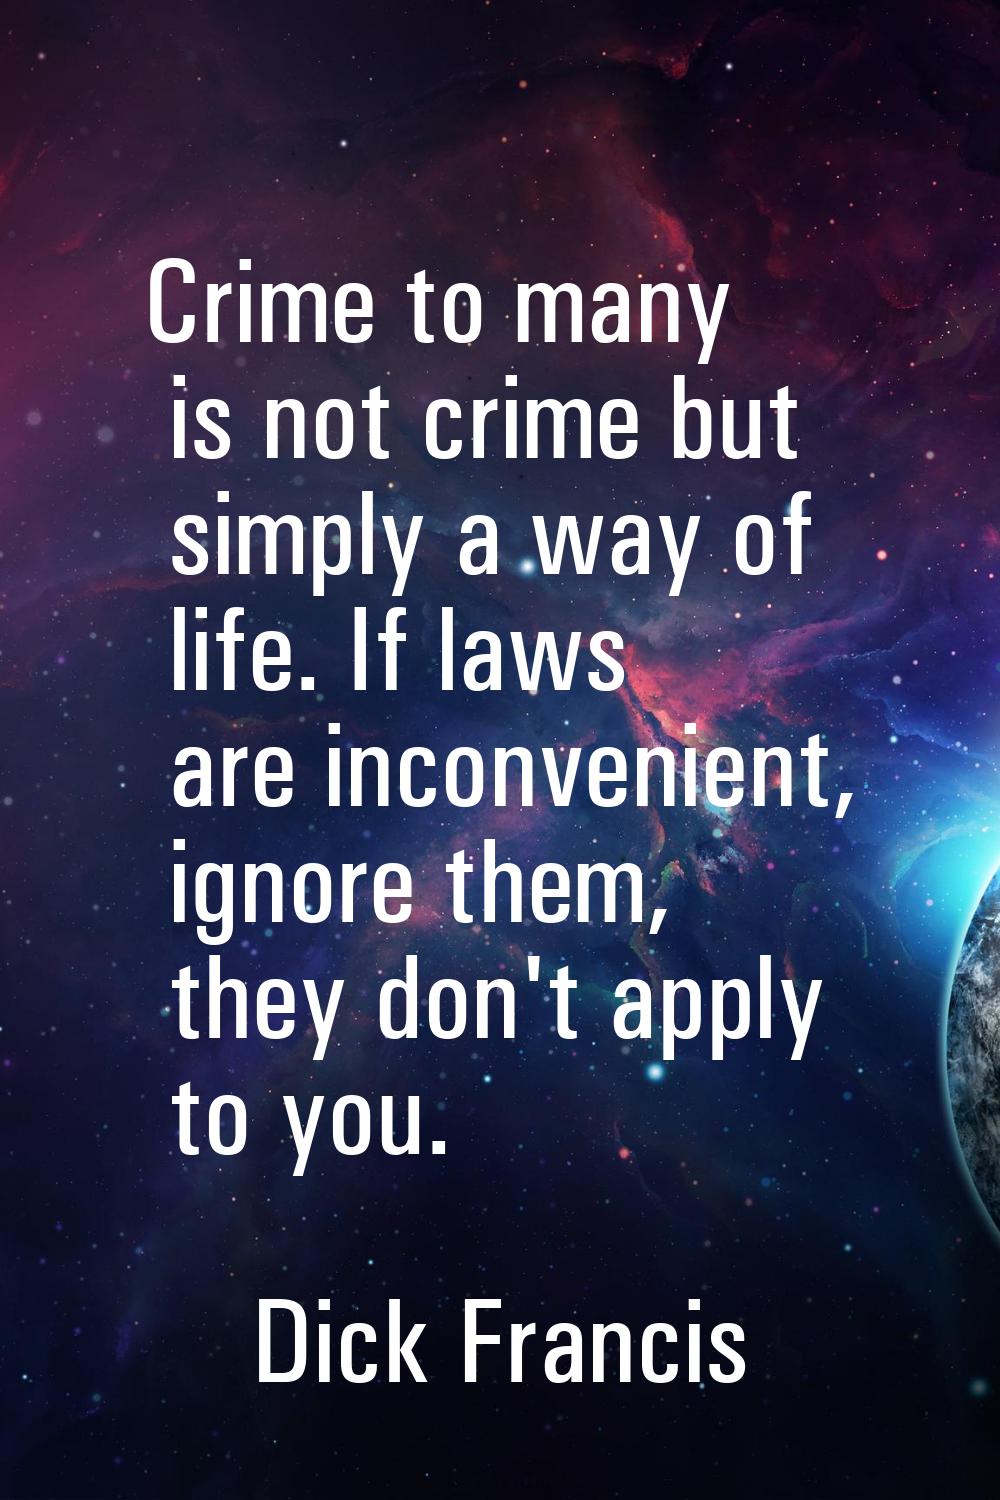 Crime to many is not crime but simply a way of life. If laws are inconvenient, ignore them, they do